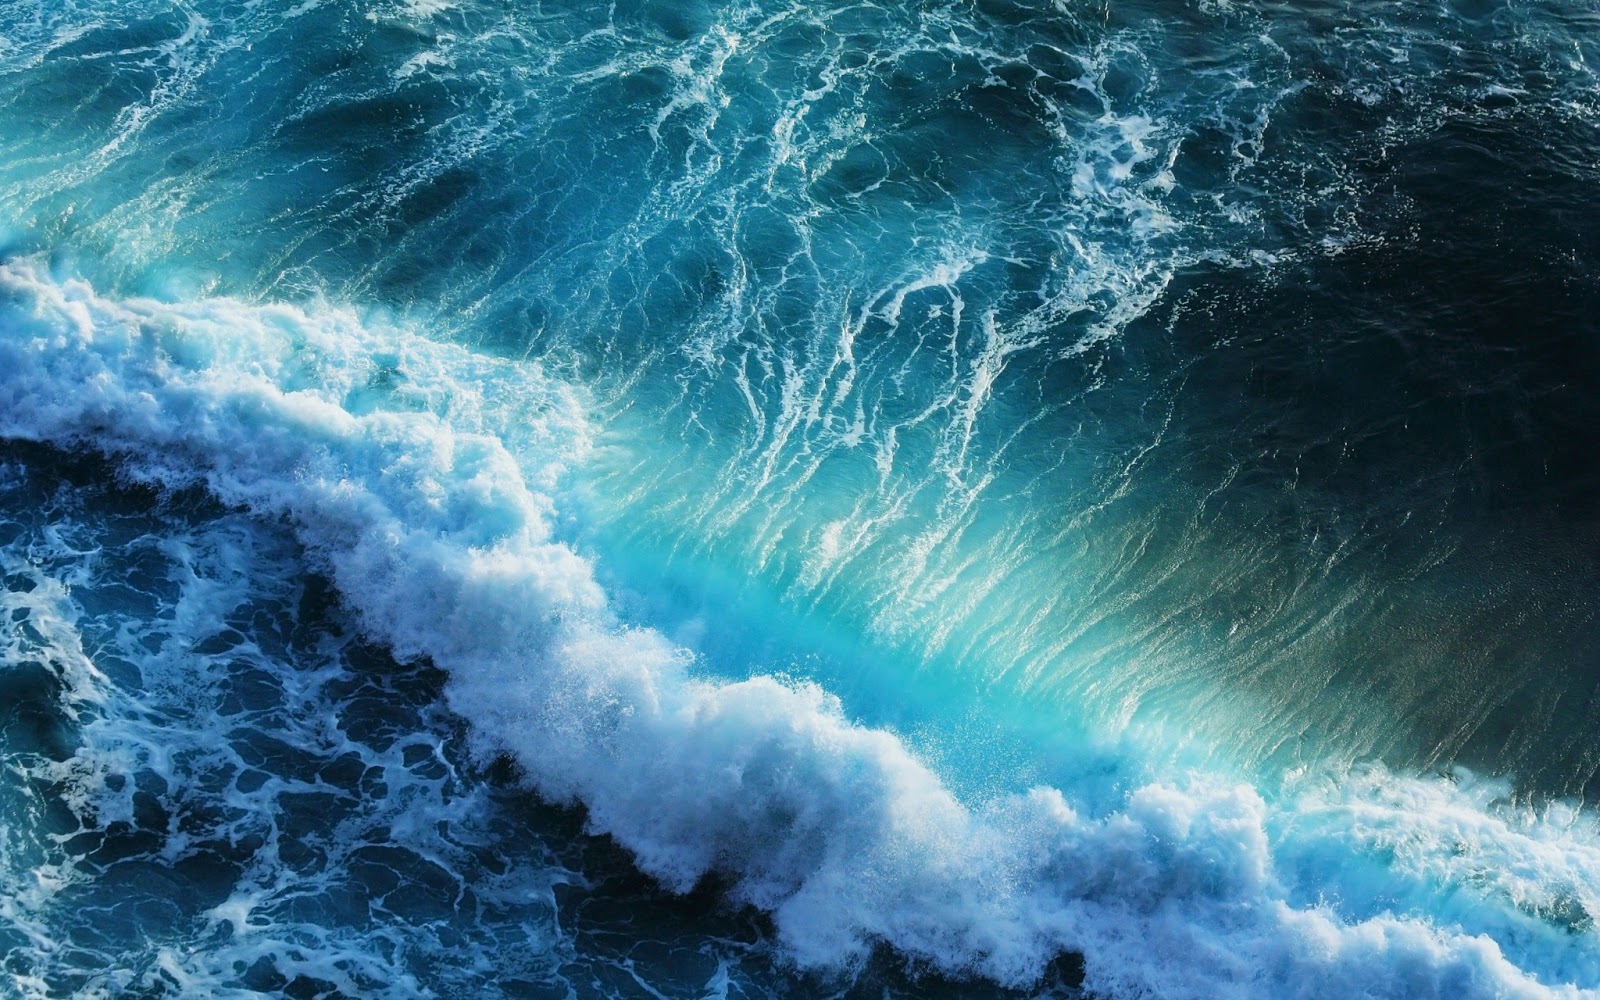 Ocean Waves Wallpaper Most Beautiful Places In The